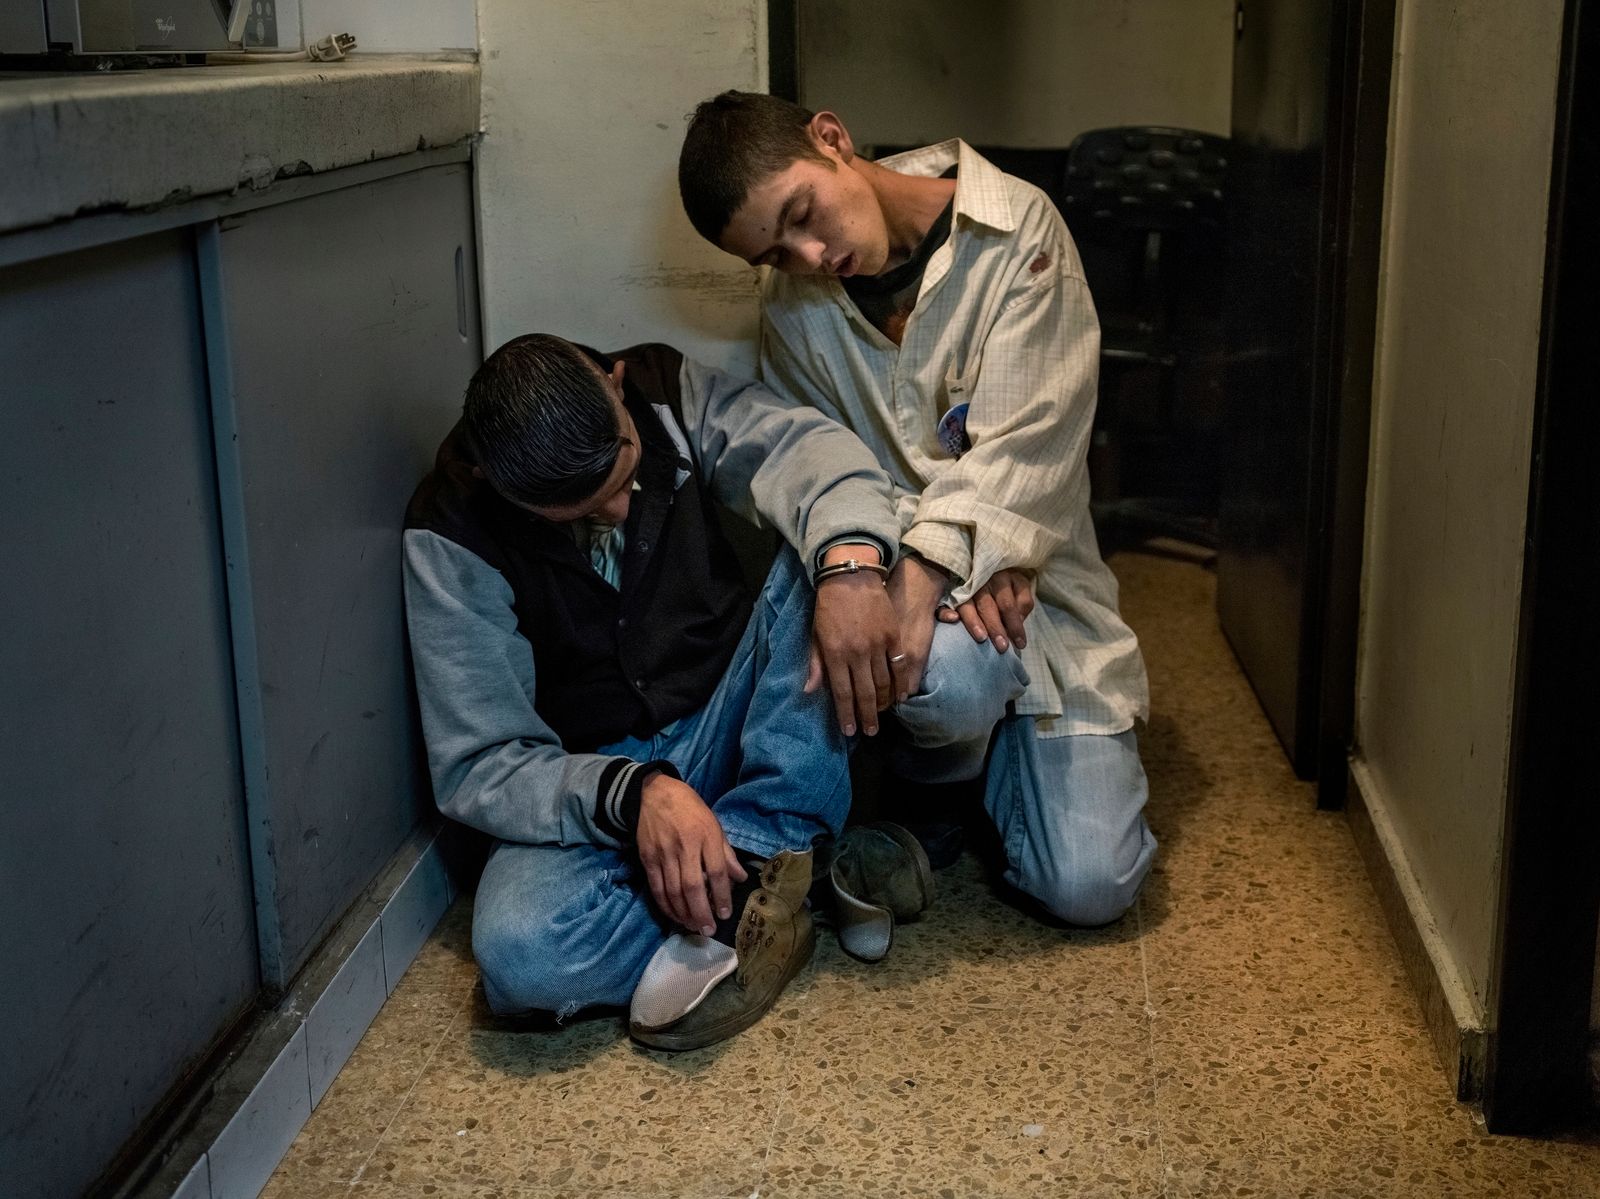 © Mads Nissen - Two young boys on drugs -completely out of reach- are being arrested by the police after some street fighting.